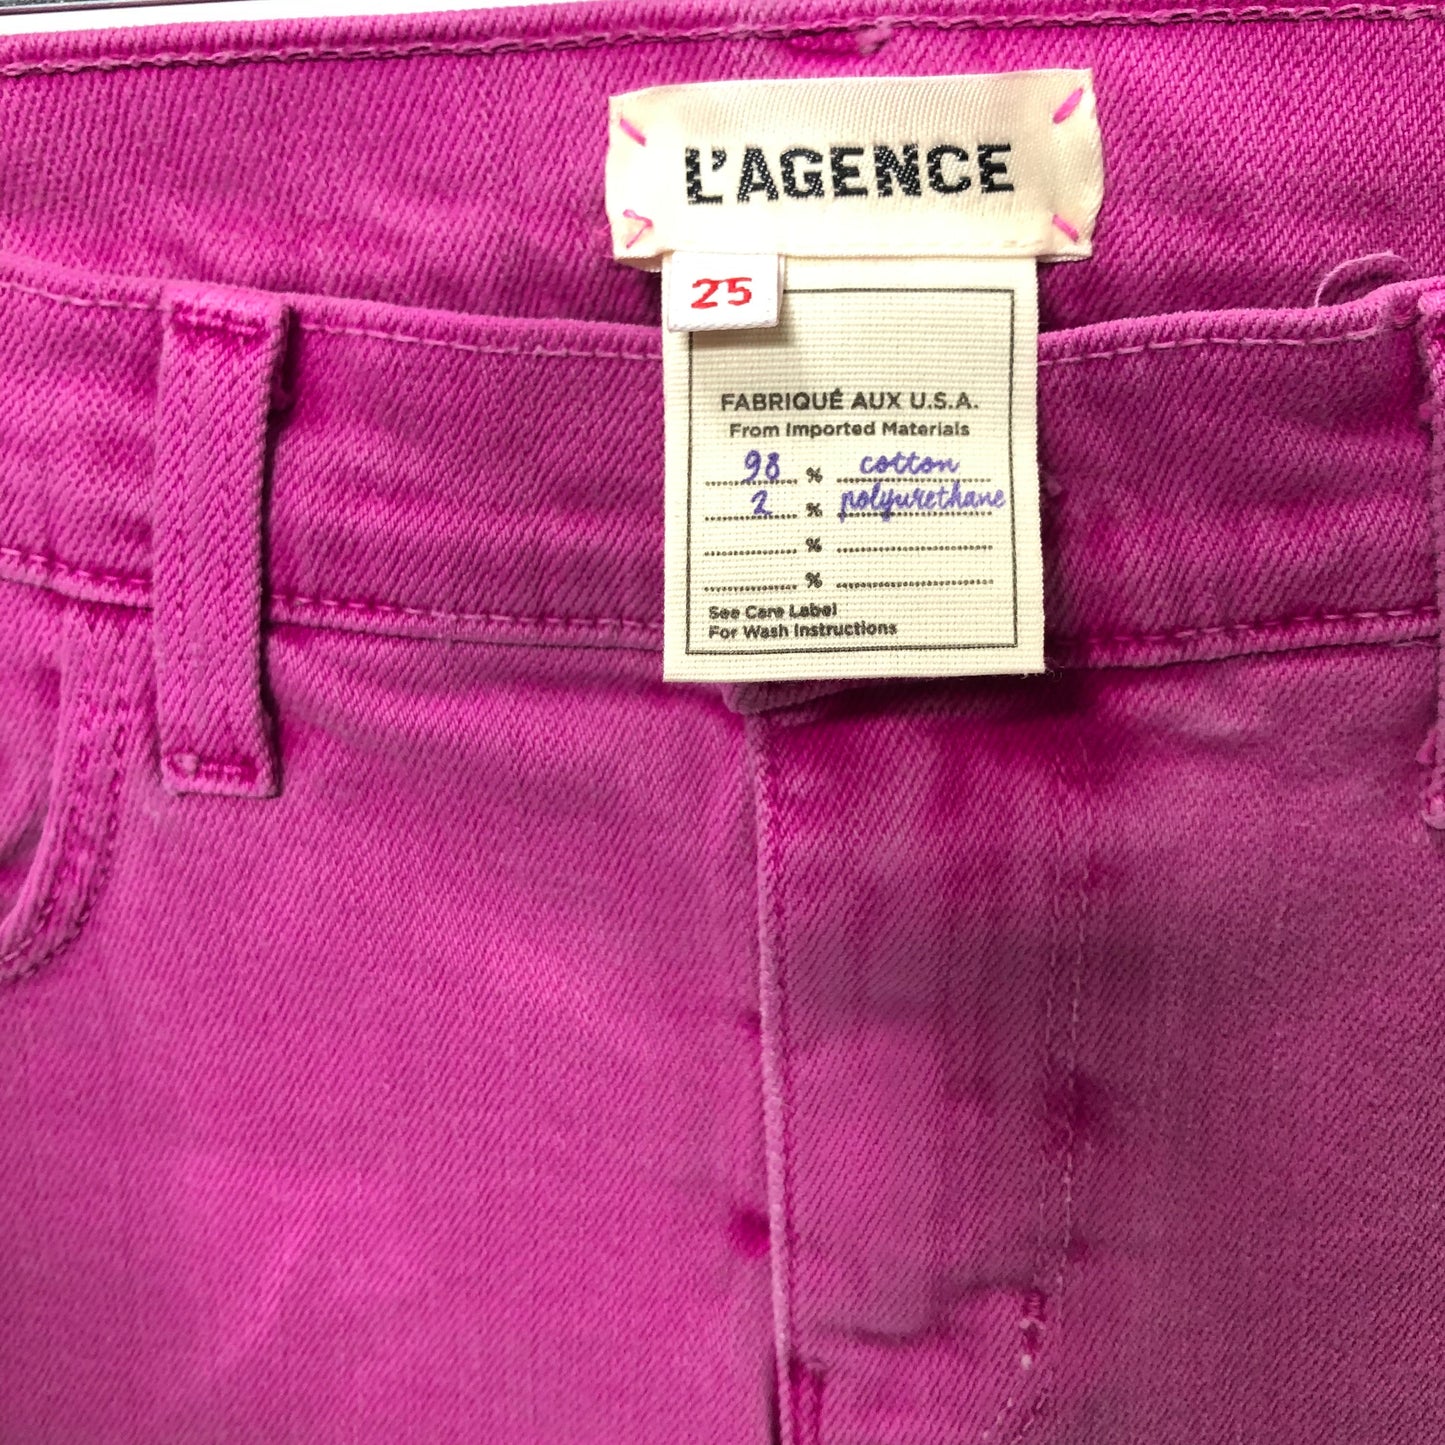 Shorts By L Agence  Size: 0